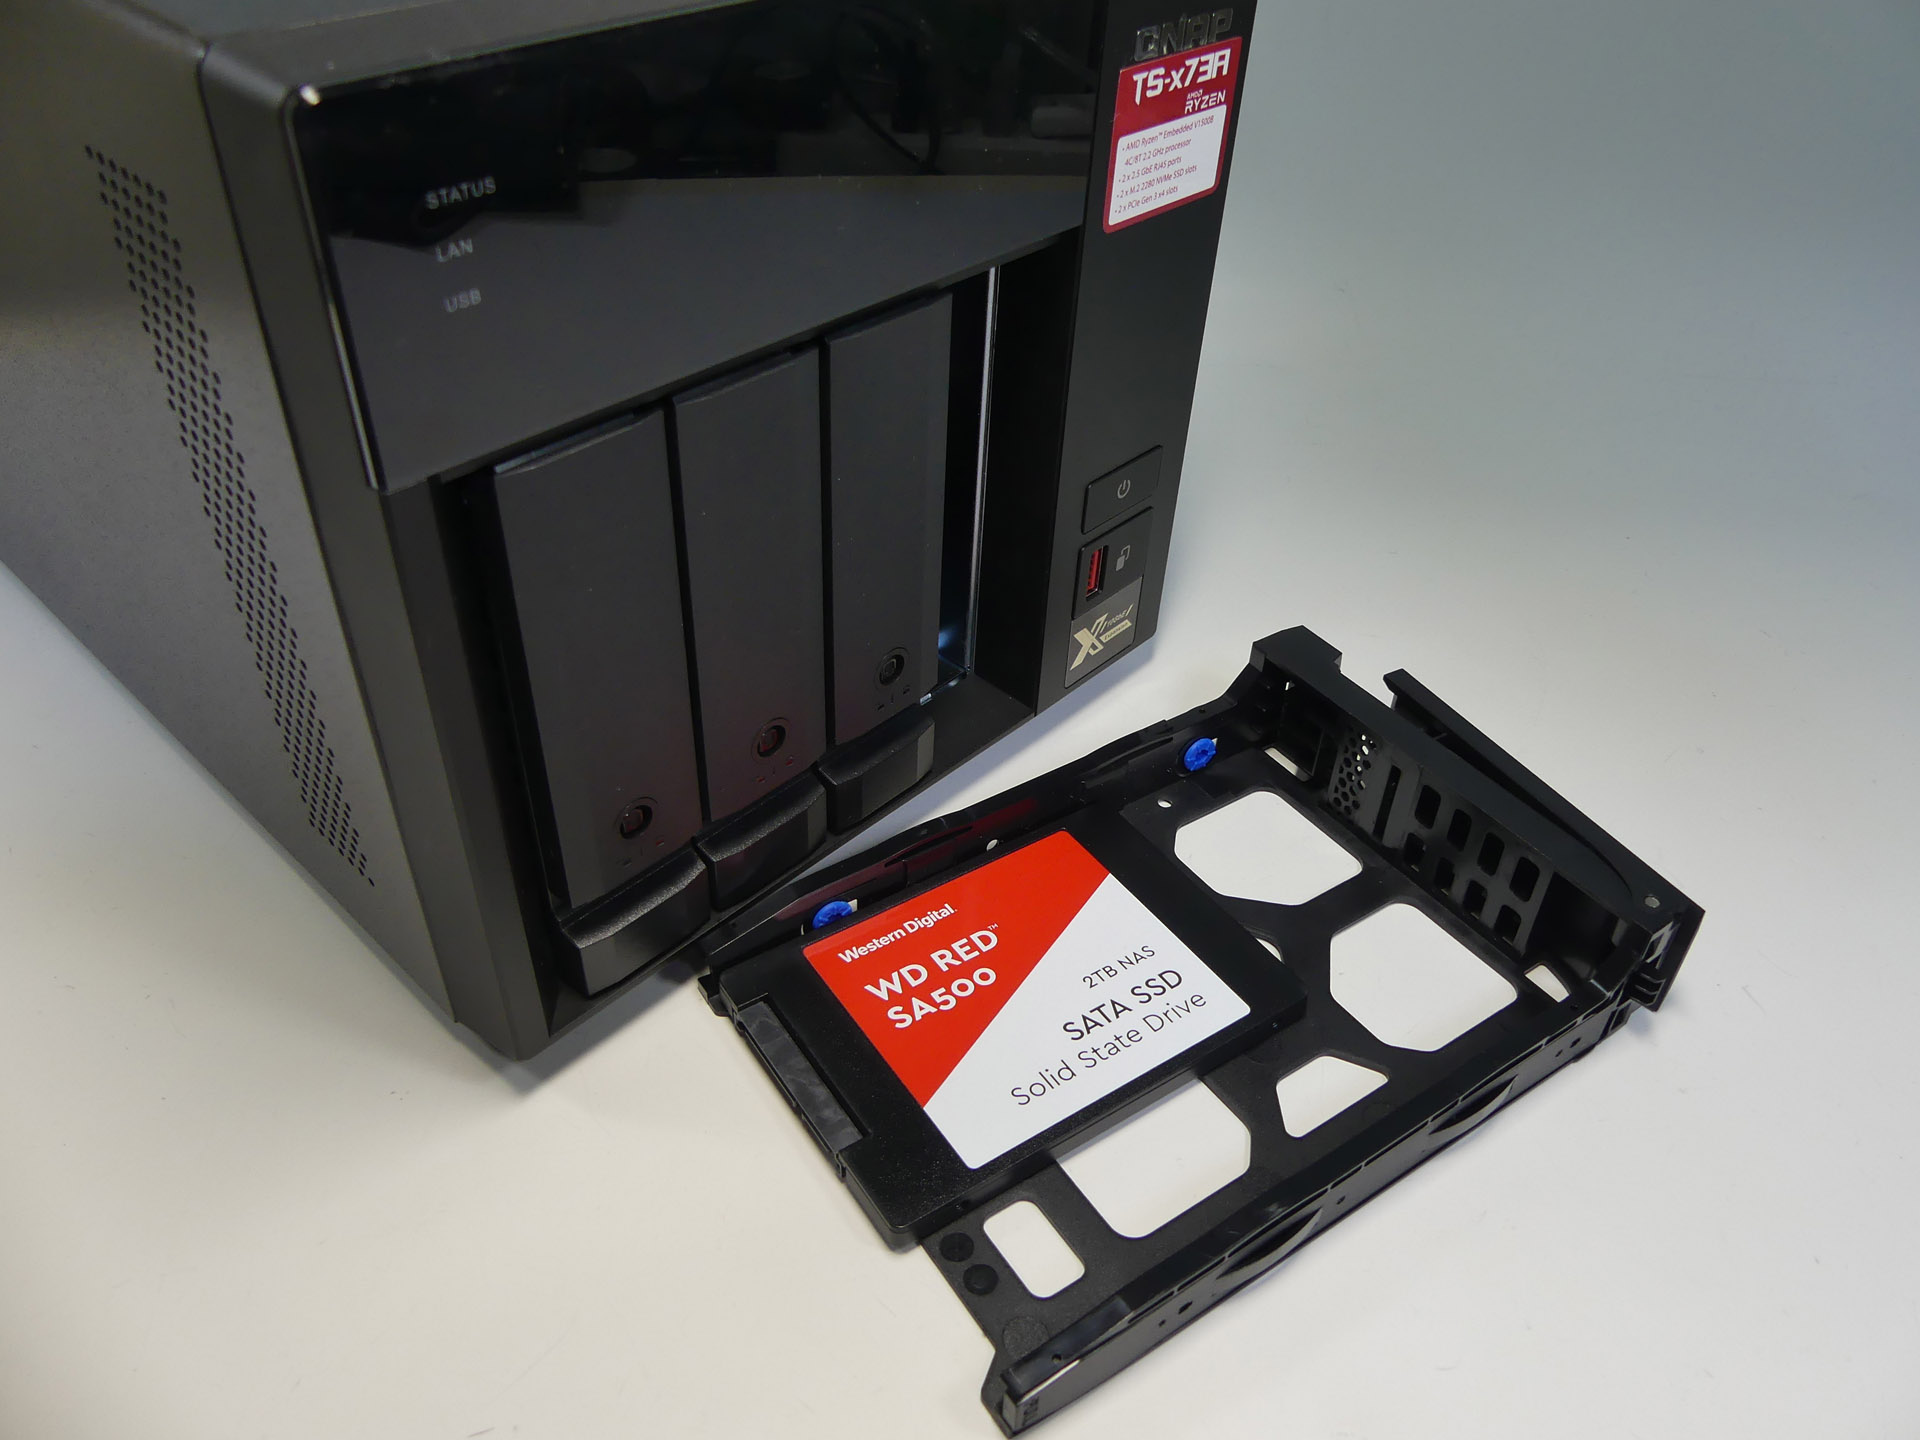 NAS SSD vs HDD: Choosing the Right Drive for Your Network